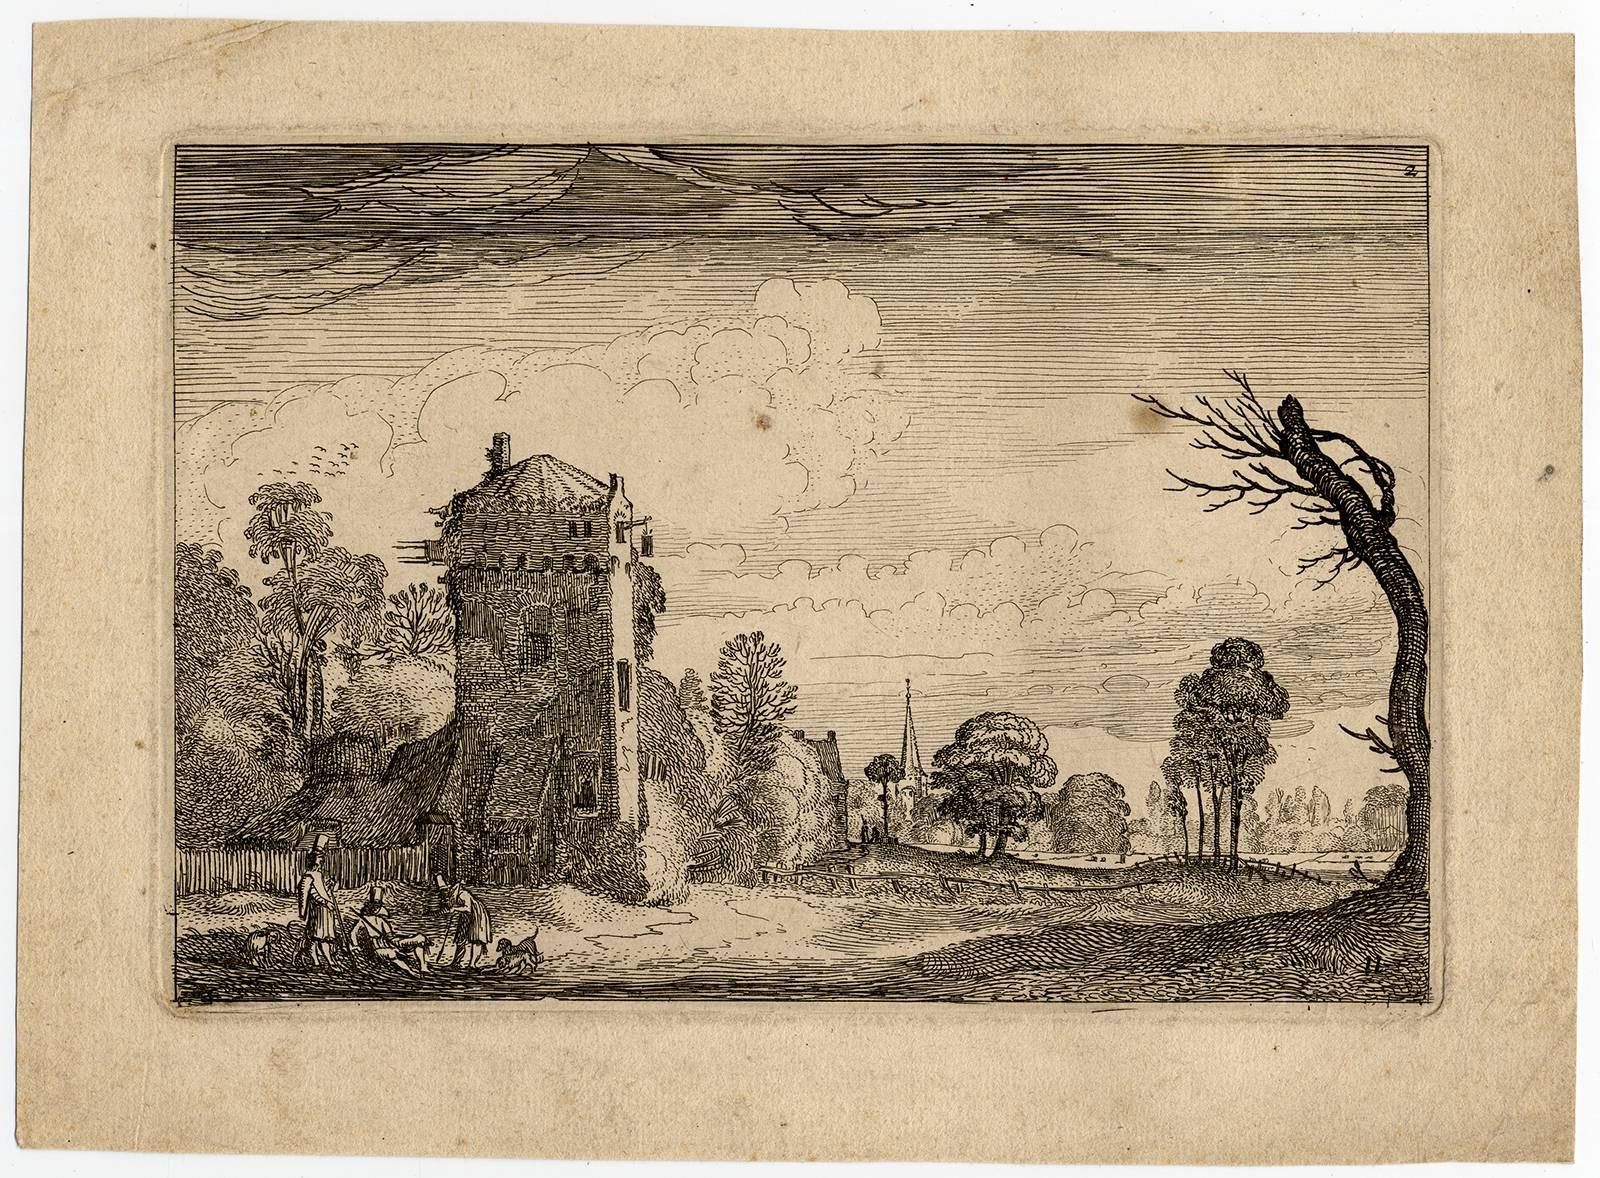 Jan Van de Velde Landscape Print - Untitled - View of a road with a watch tower and 3 resting men.